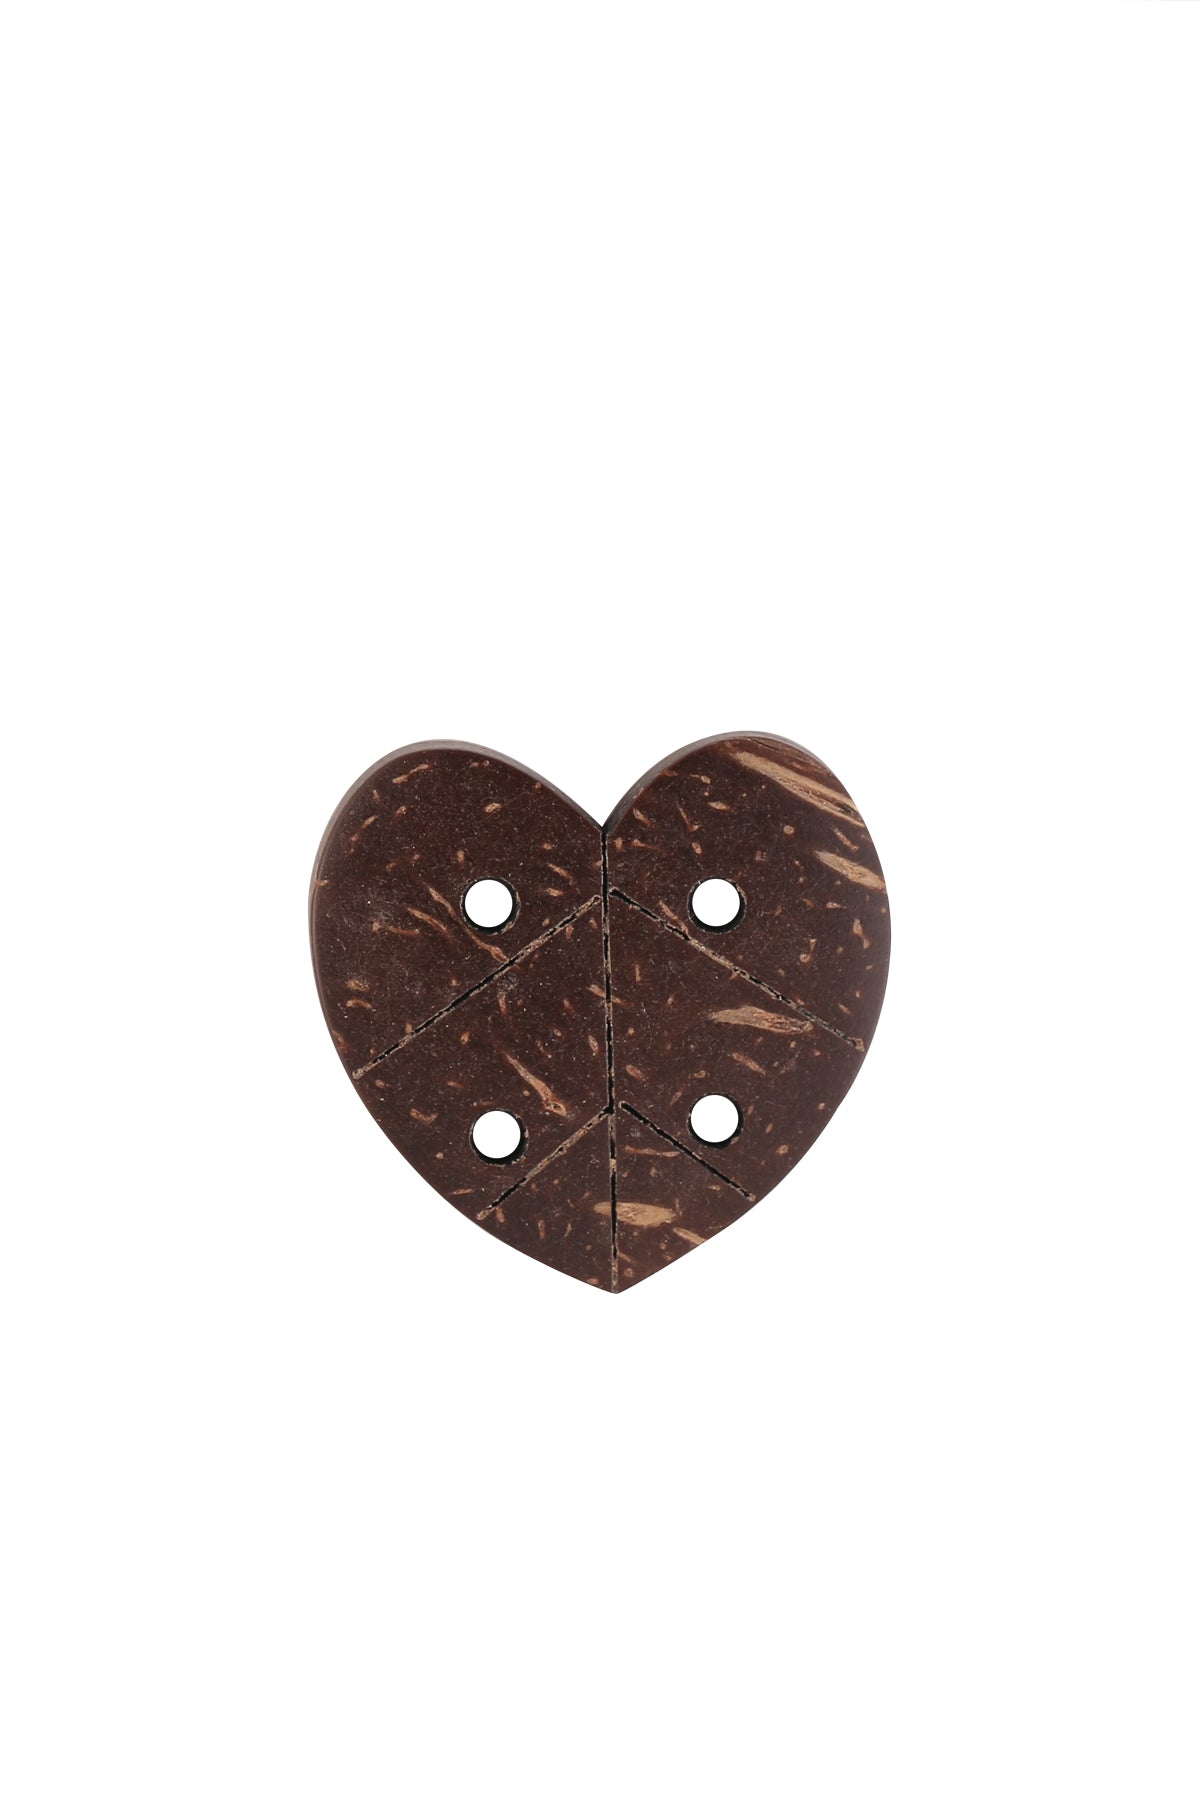 Heart Shape 4-Hole Adorable Brown Coco Buttons